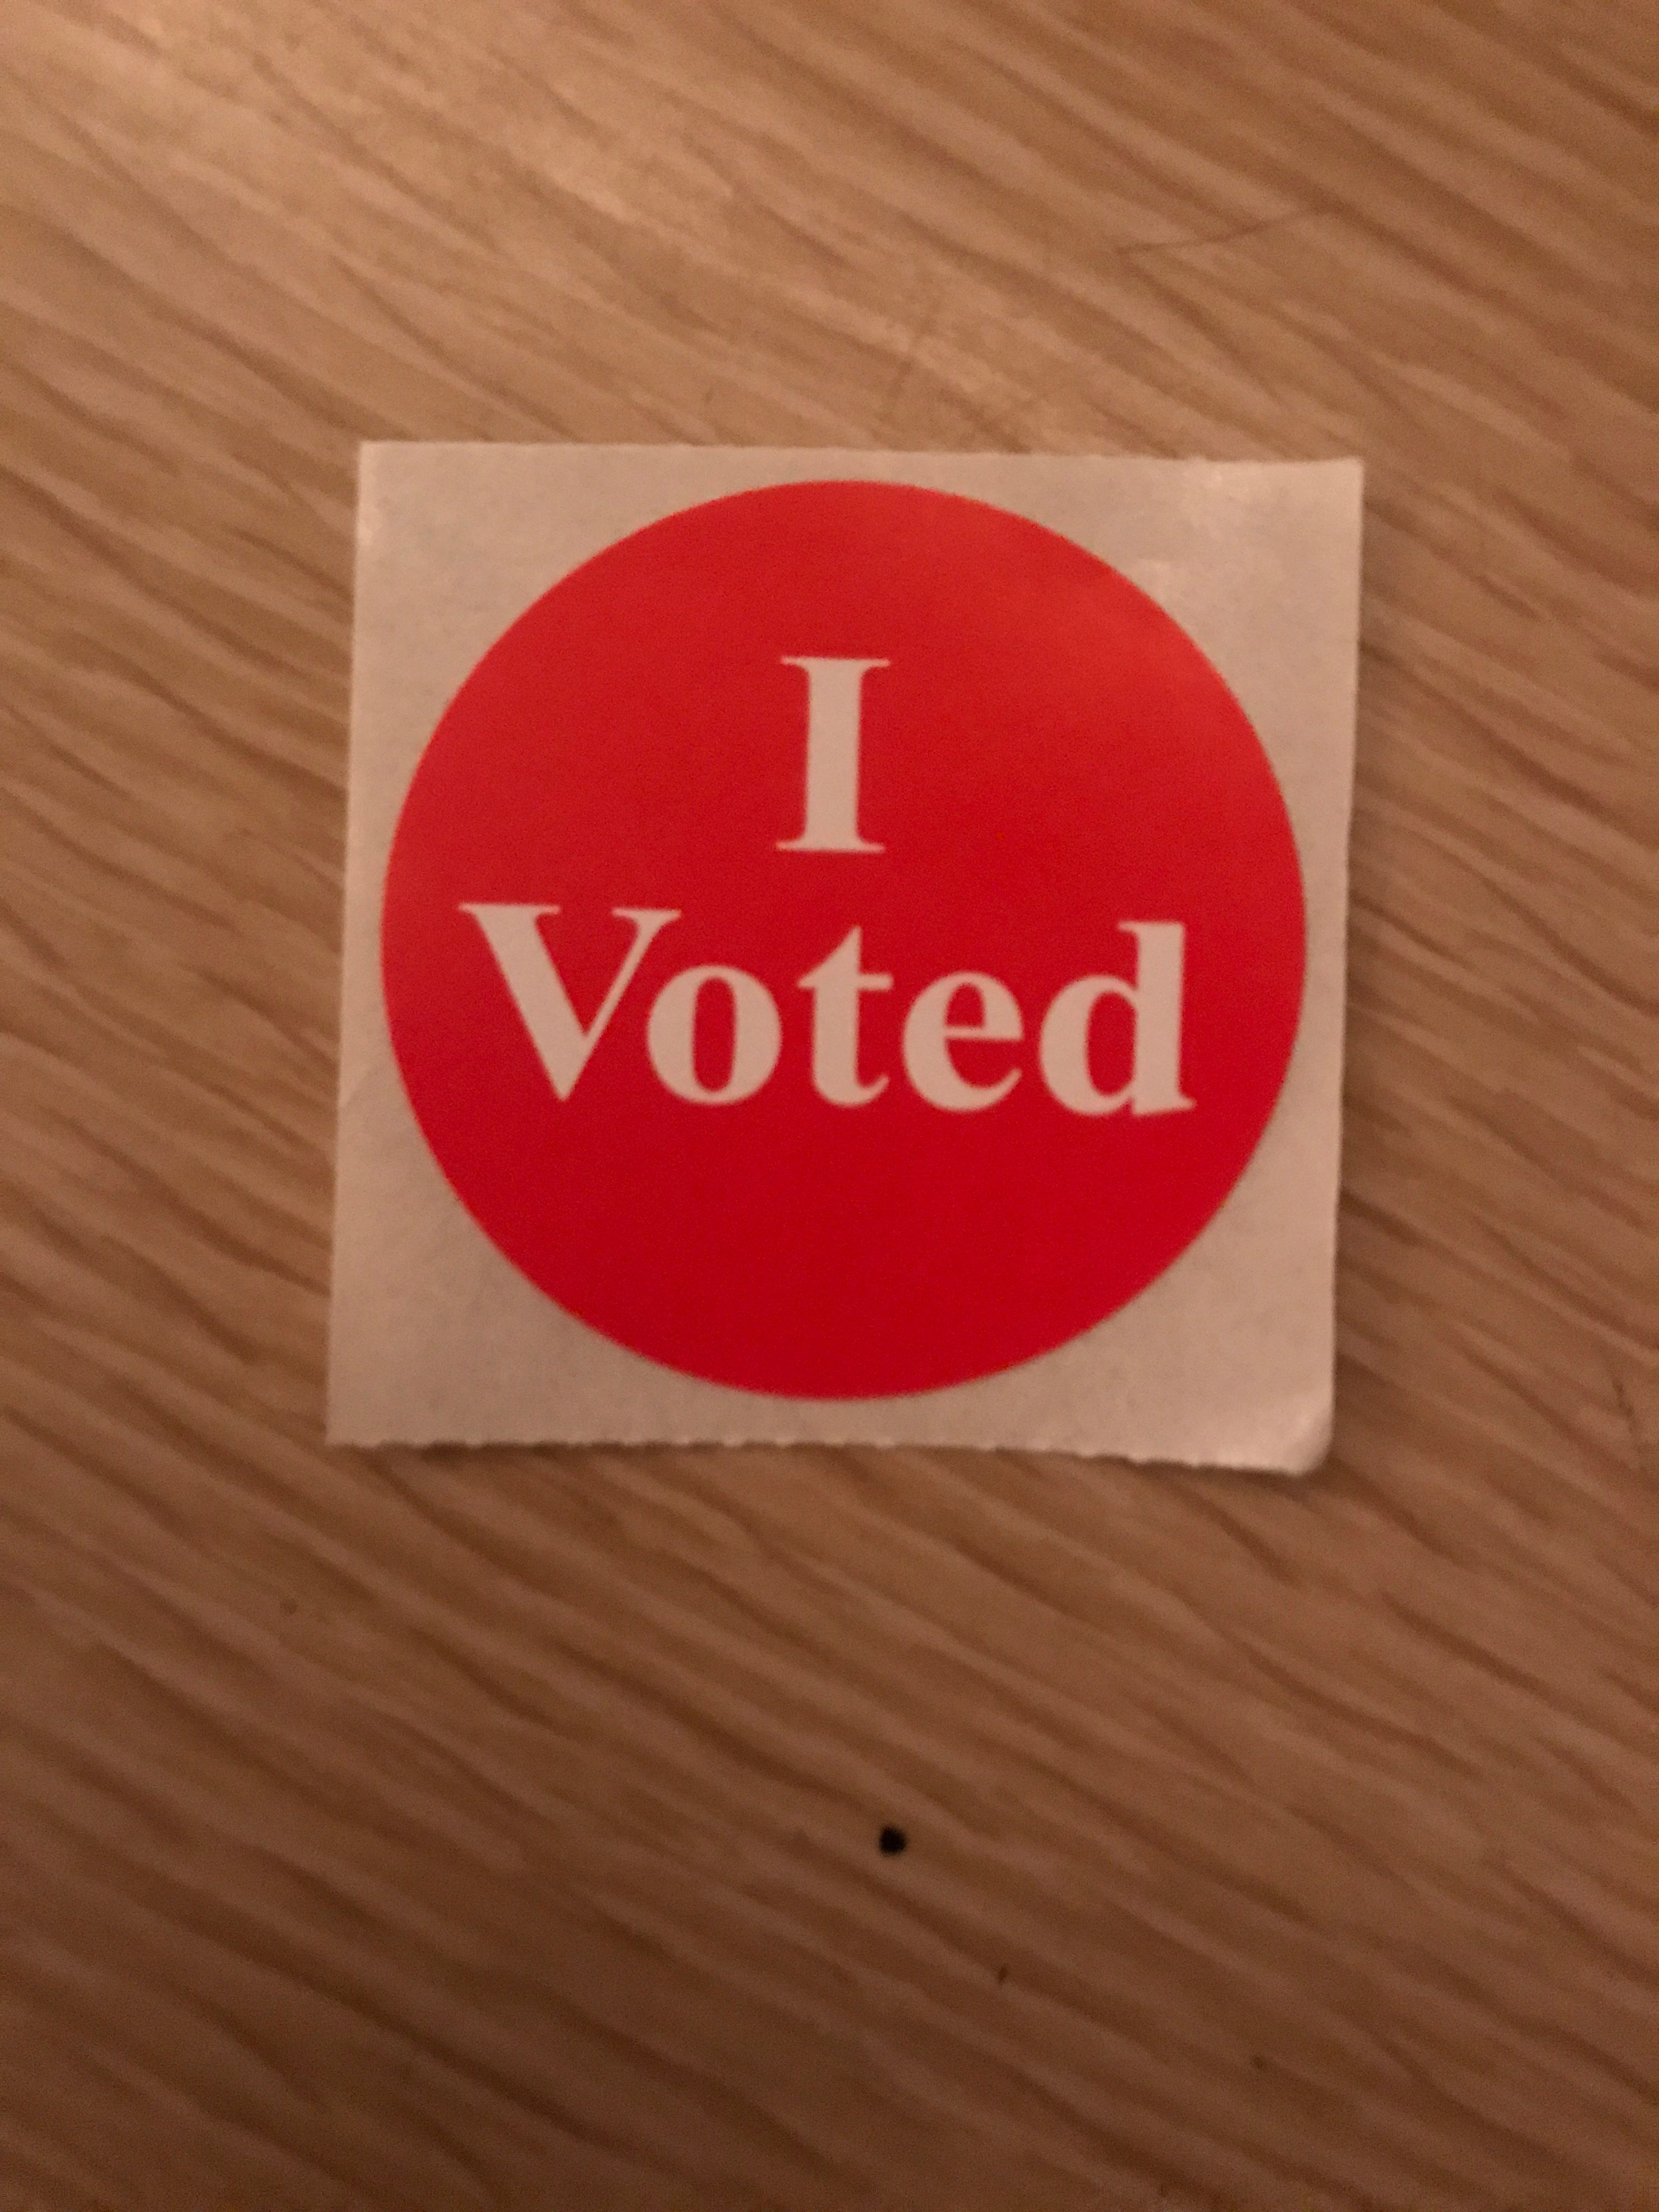 Voting stickers are a symbol of doing one’s civic duty on Election Day.